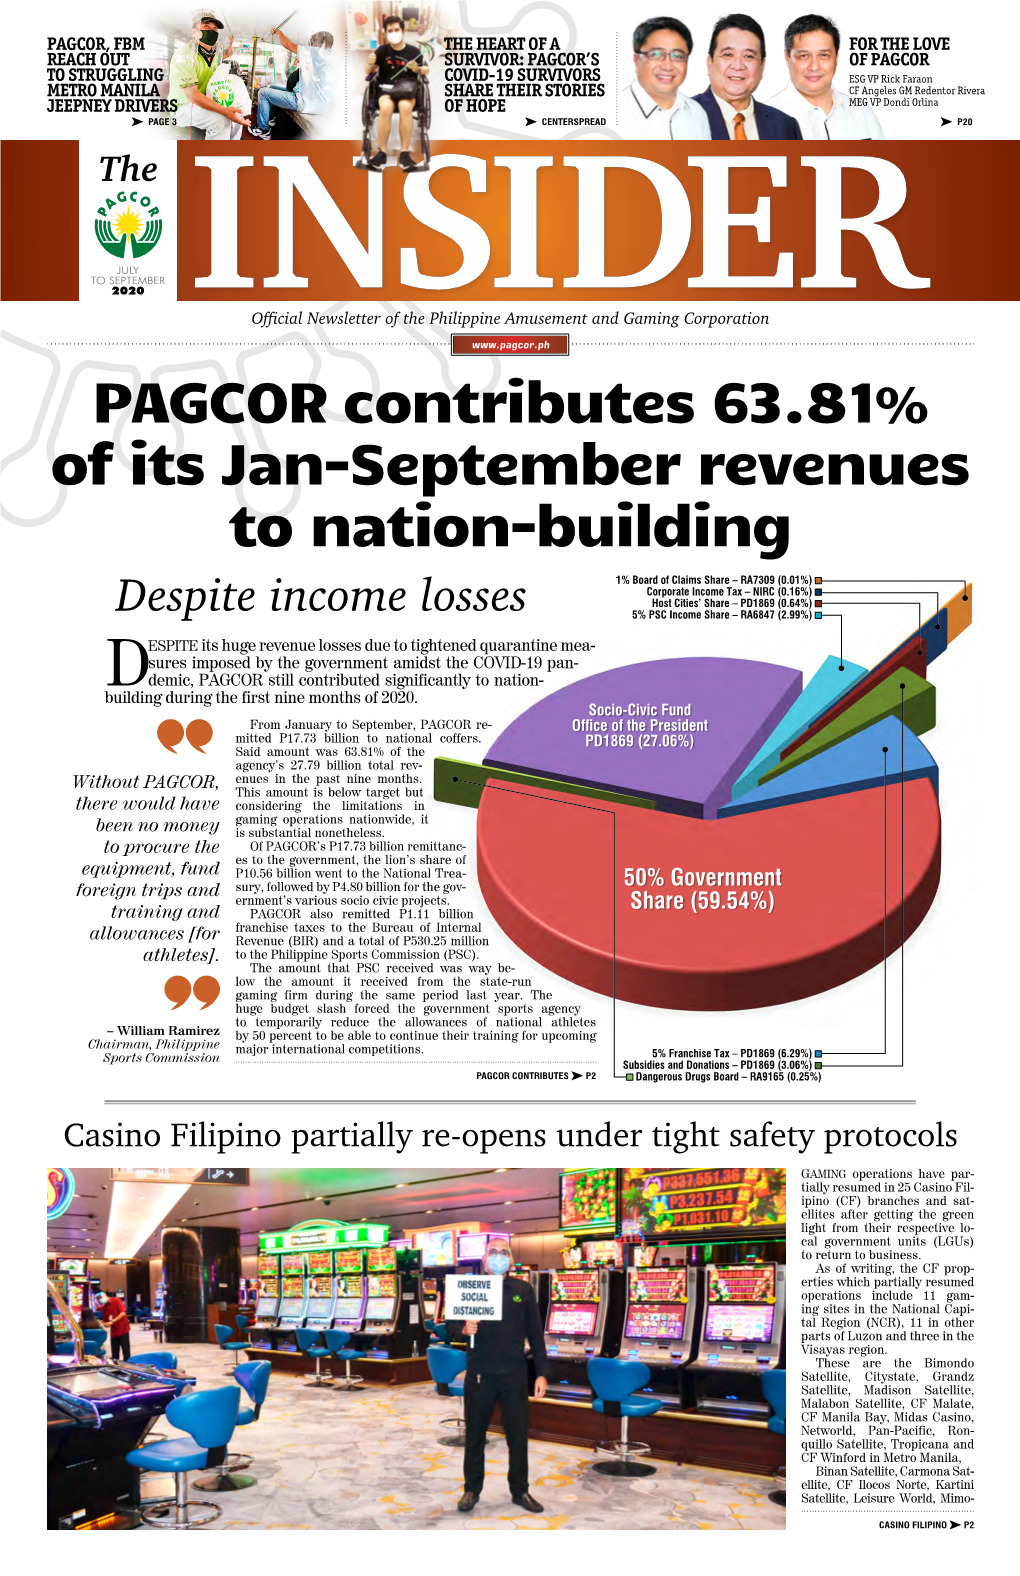 PAGCOR Contributes 63.81% of Its Jan-September Revenues to Nation